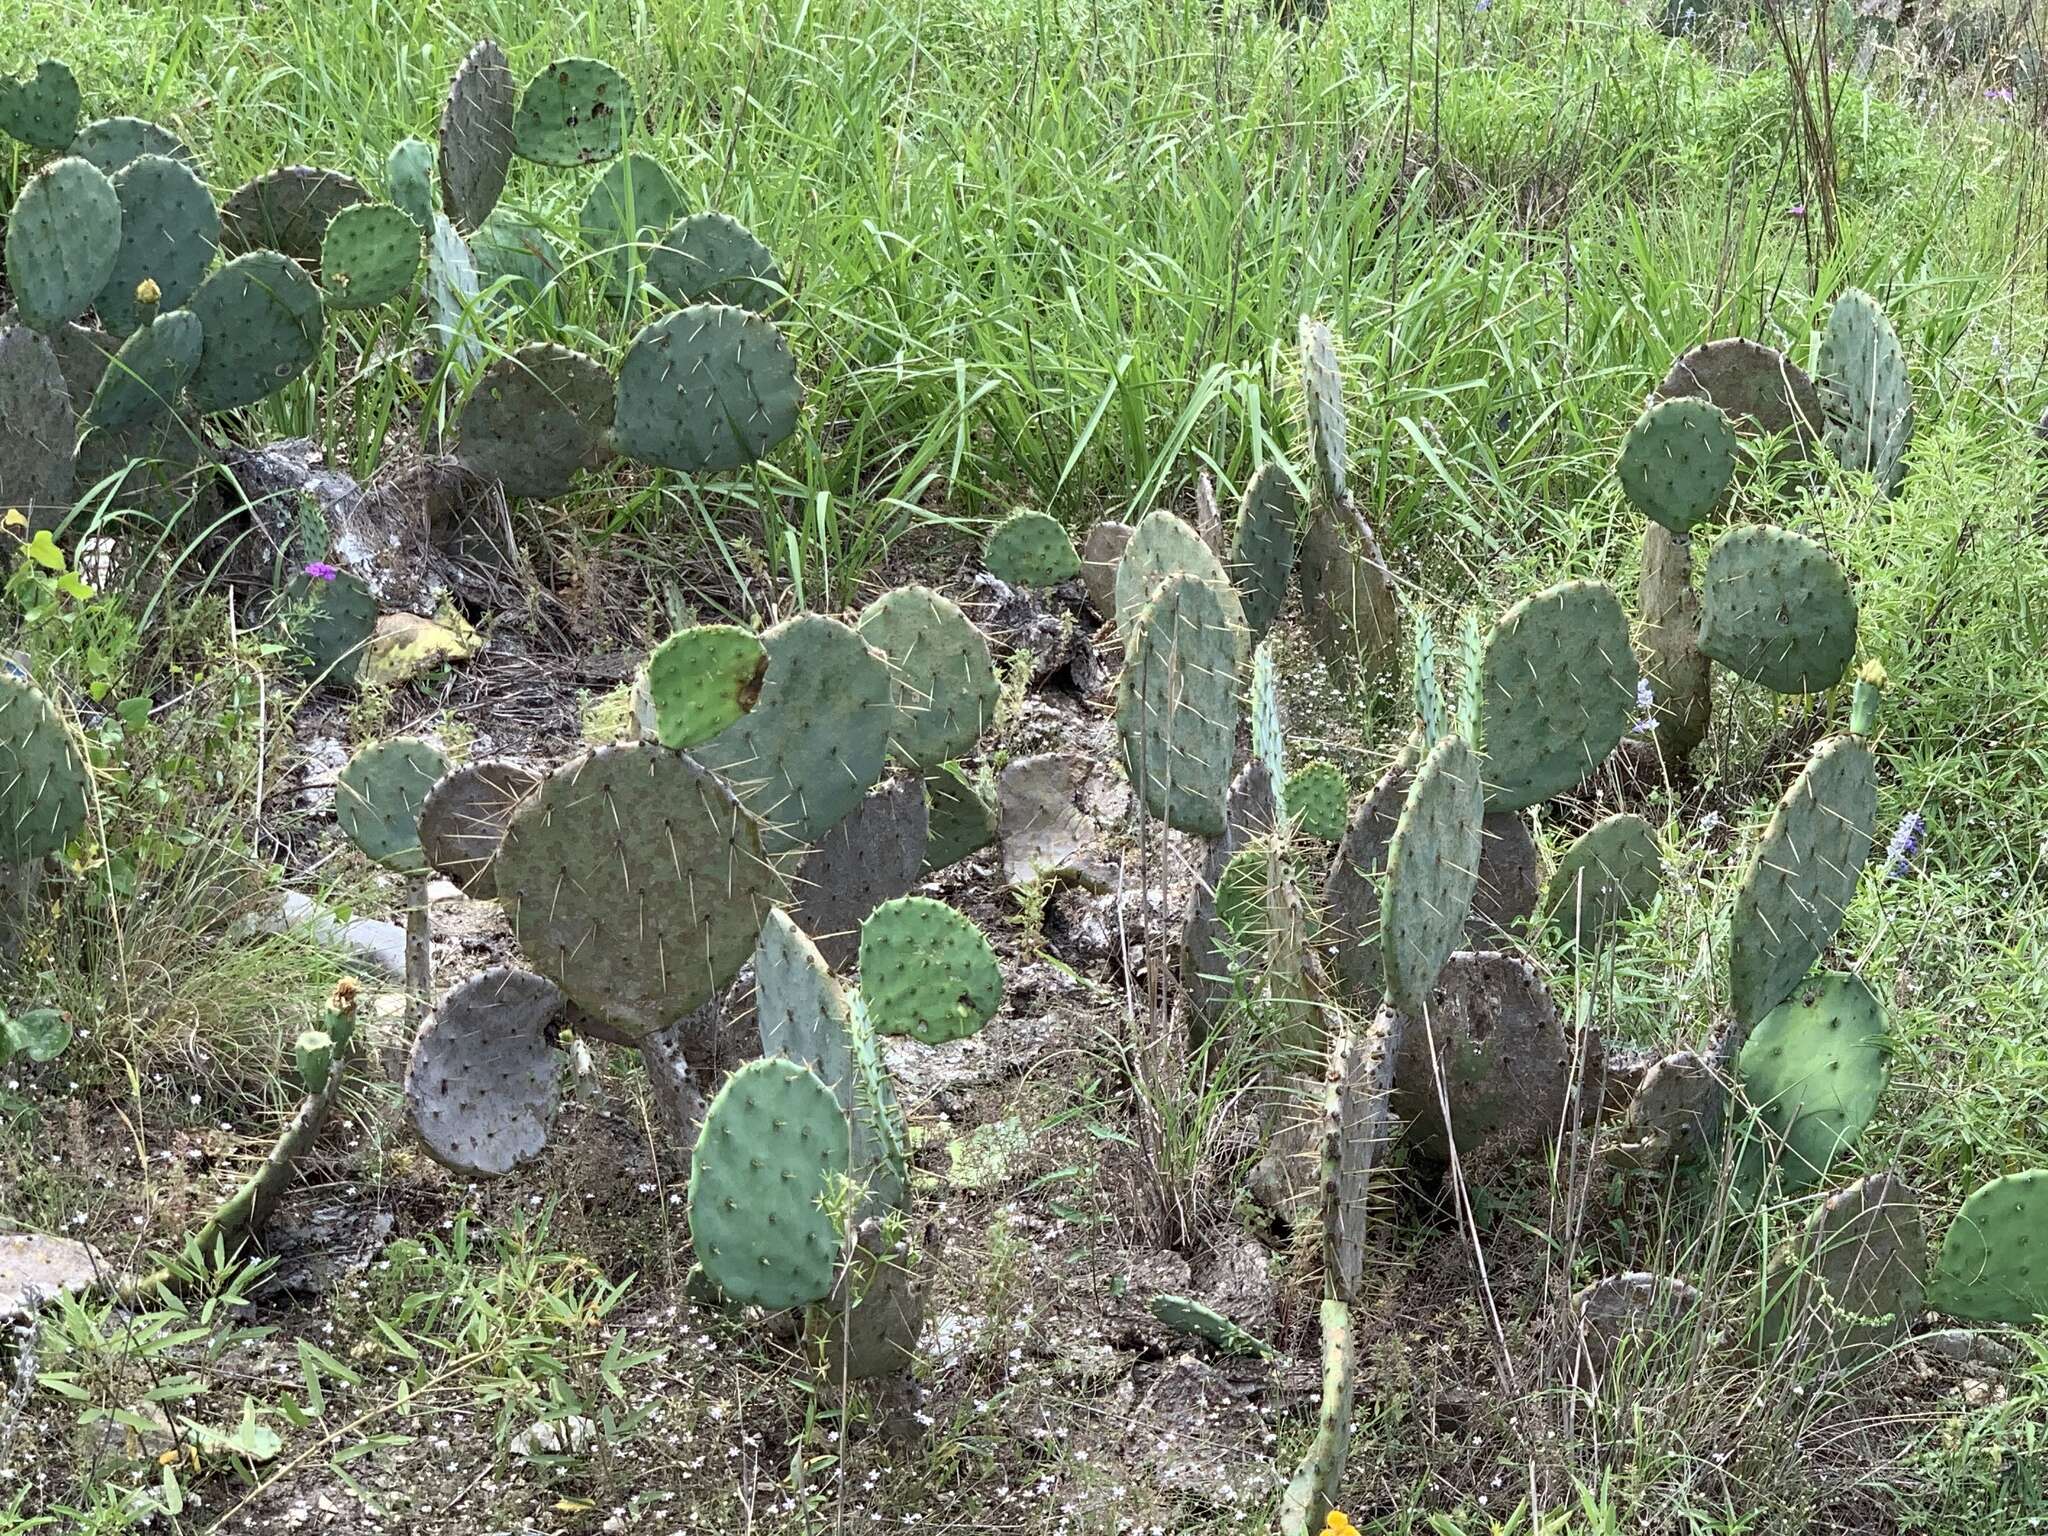 Image of Opuntia pyrocarpa Griffiths